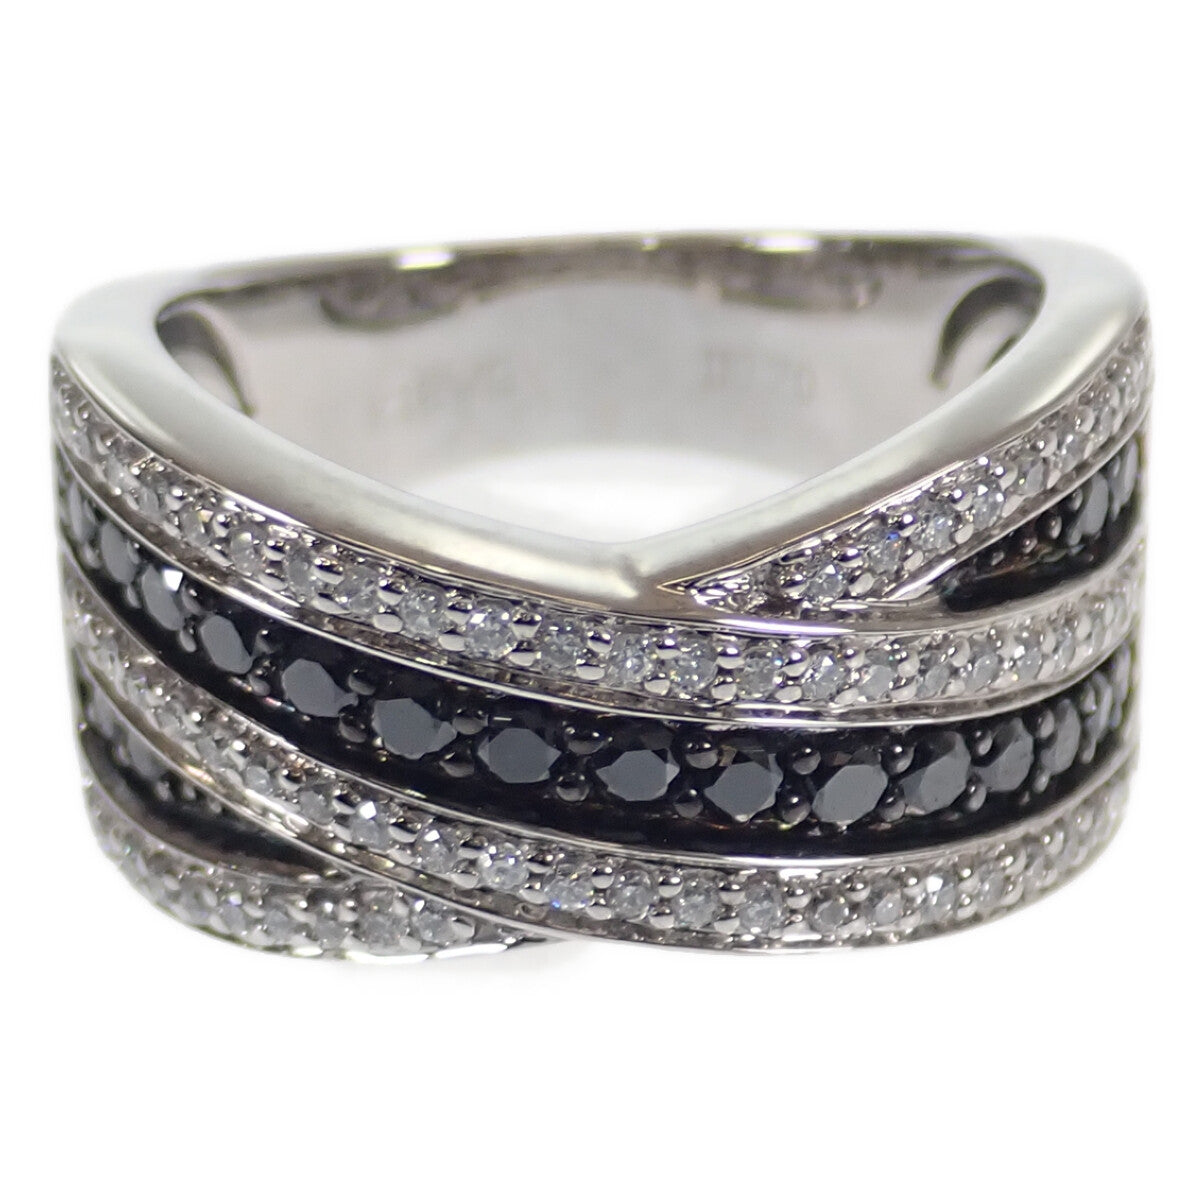 [LuxUness]  Women's Designer D0.70 Ring in K18 White Gold & Black Diamond, Size 12 (Used) in Excellent condition